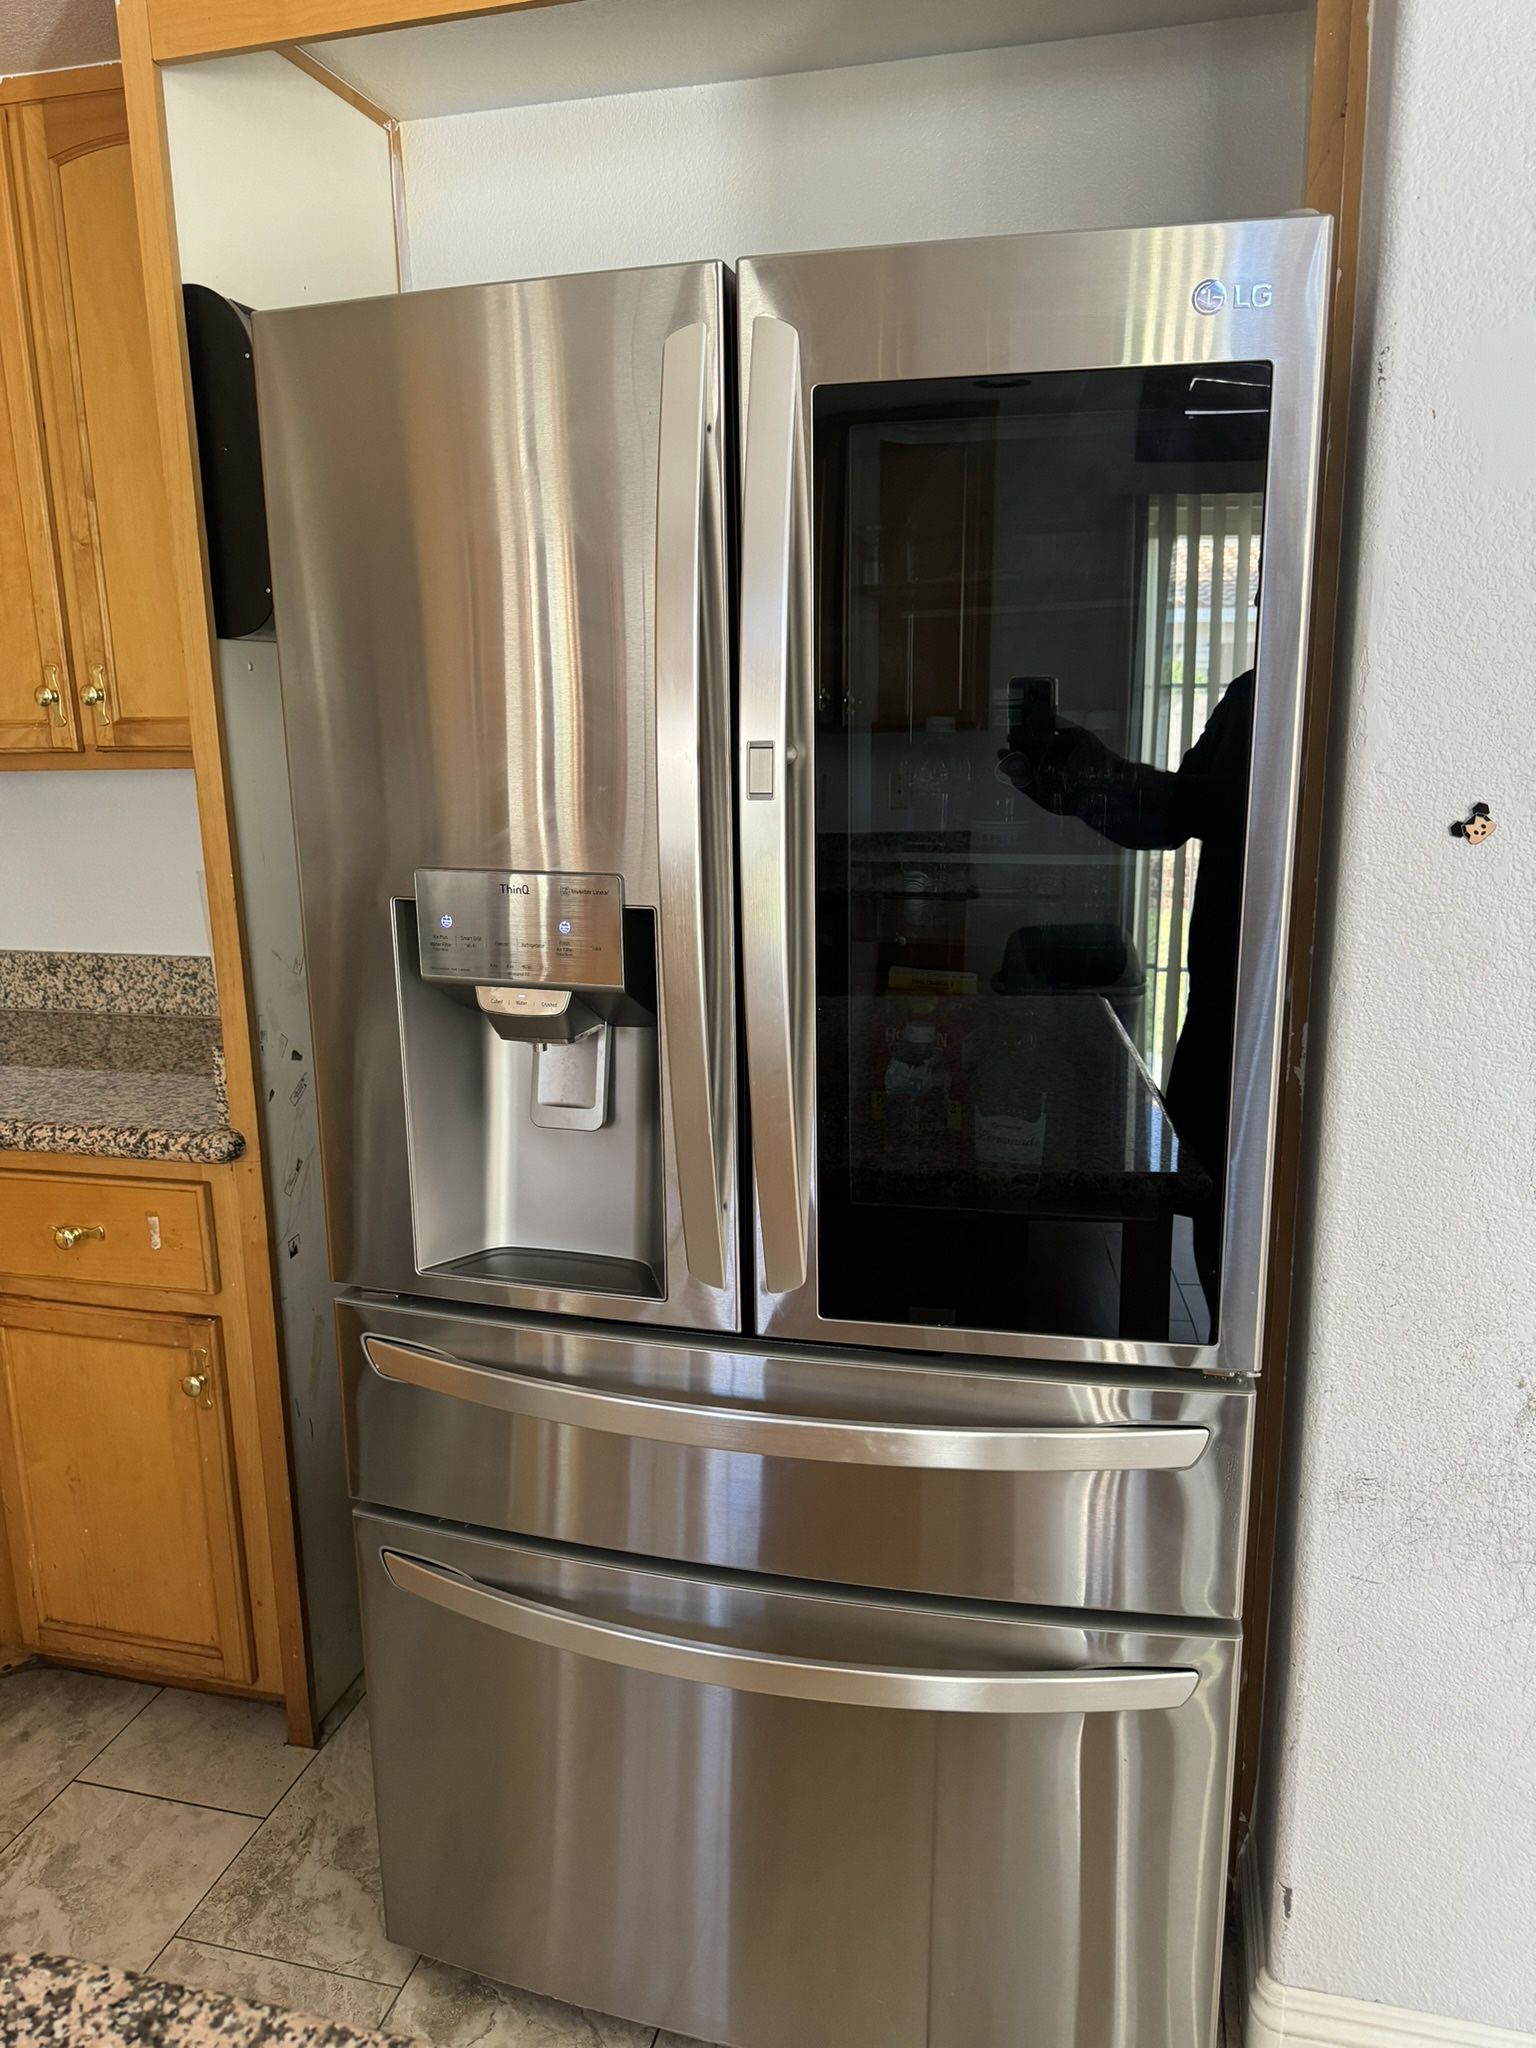 30cubic LG Refrigerator And LG Washer & Dryer